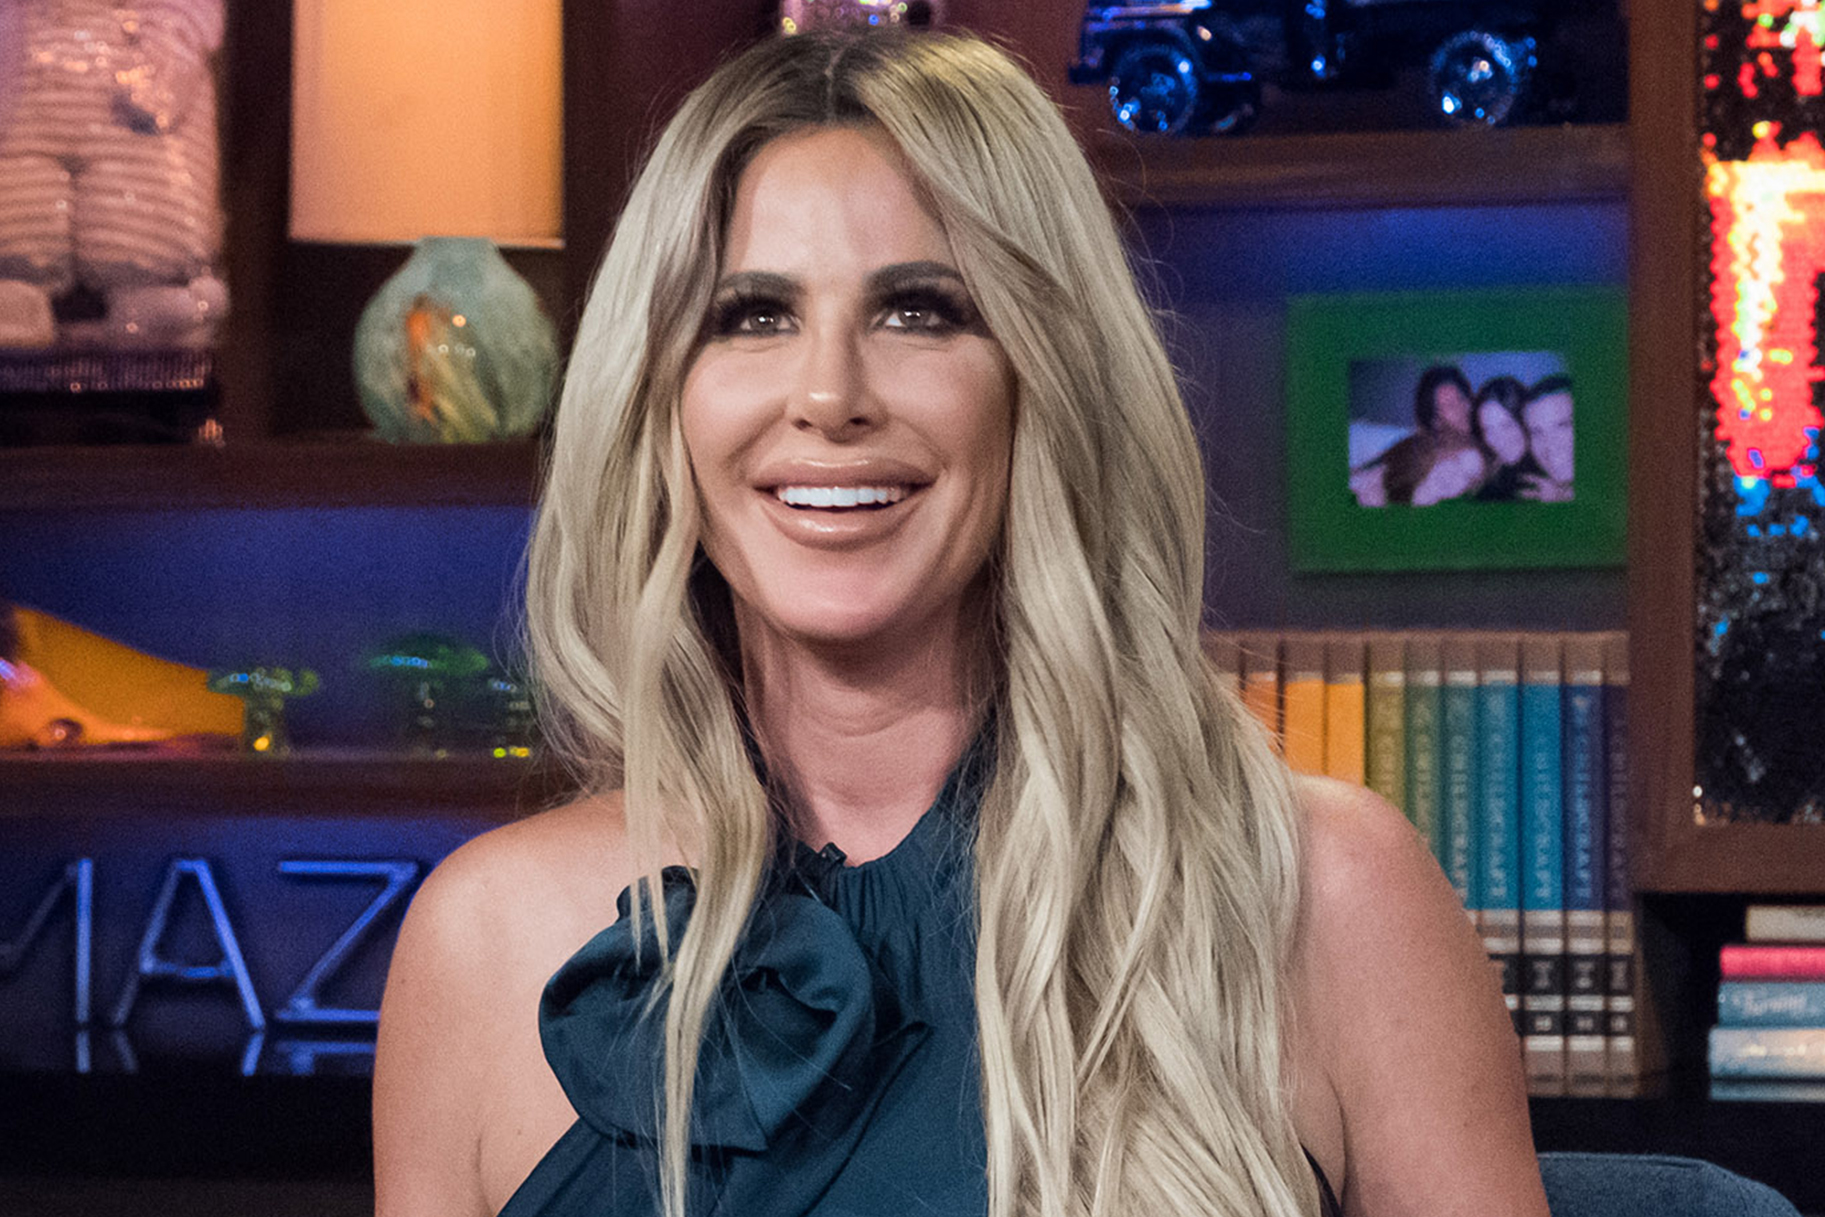 Former 'Real Housewives of Atlanta' Star Kim Zolciak Has Reportedly Been Pleading with Bravo to Giver Her a Job